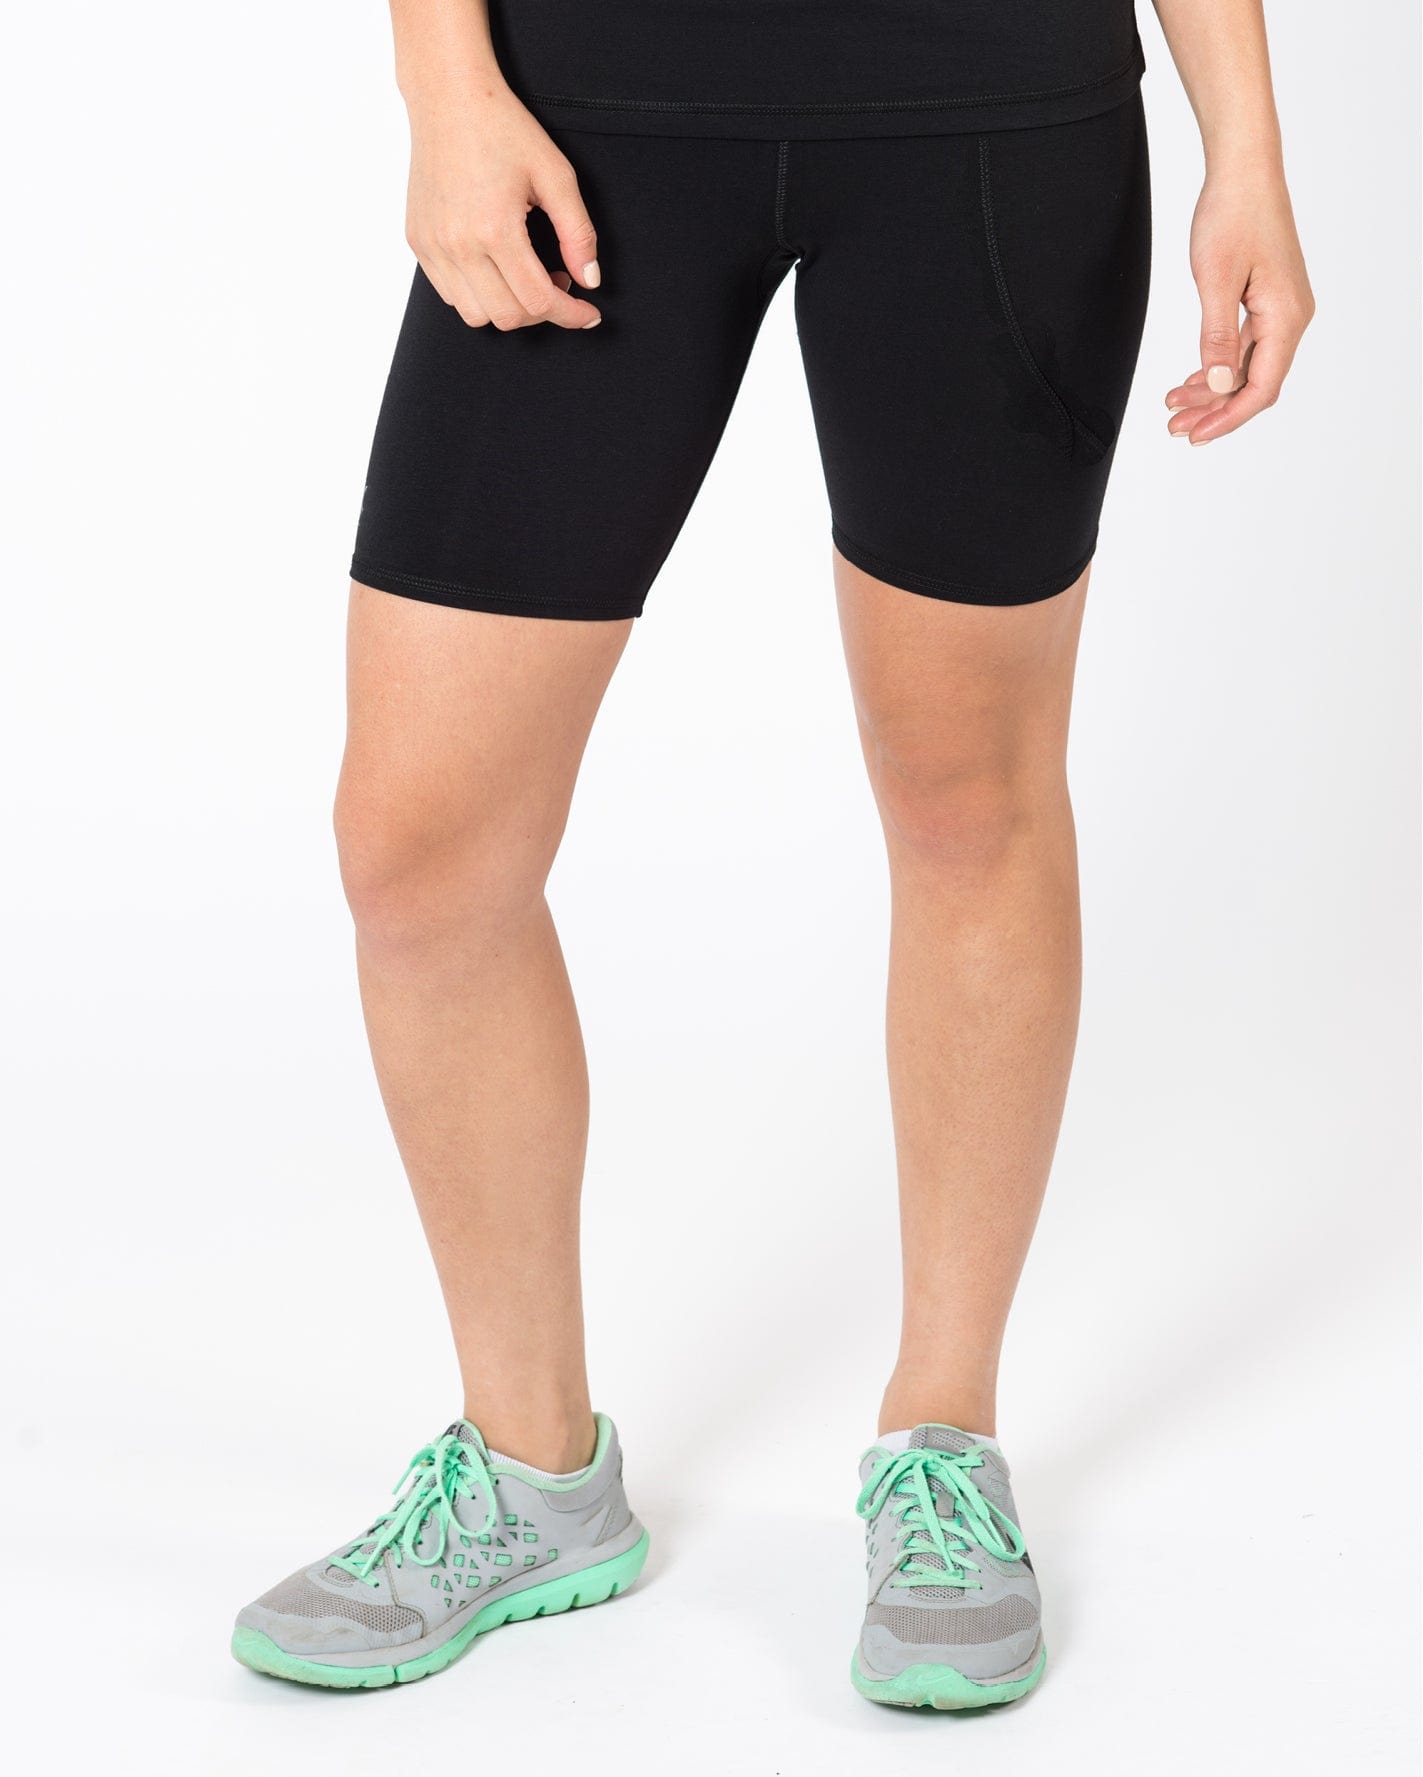 Up To 80% Off on 2 In 1 Flowy Athletic Shorts